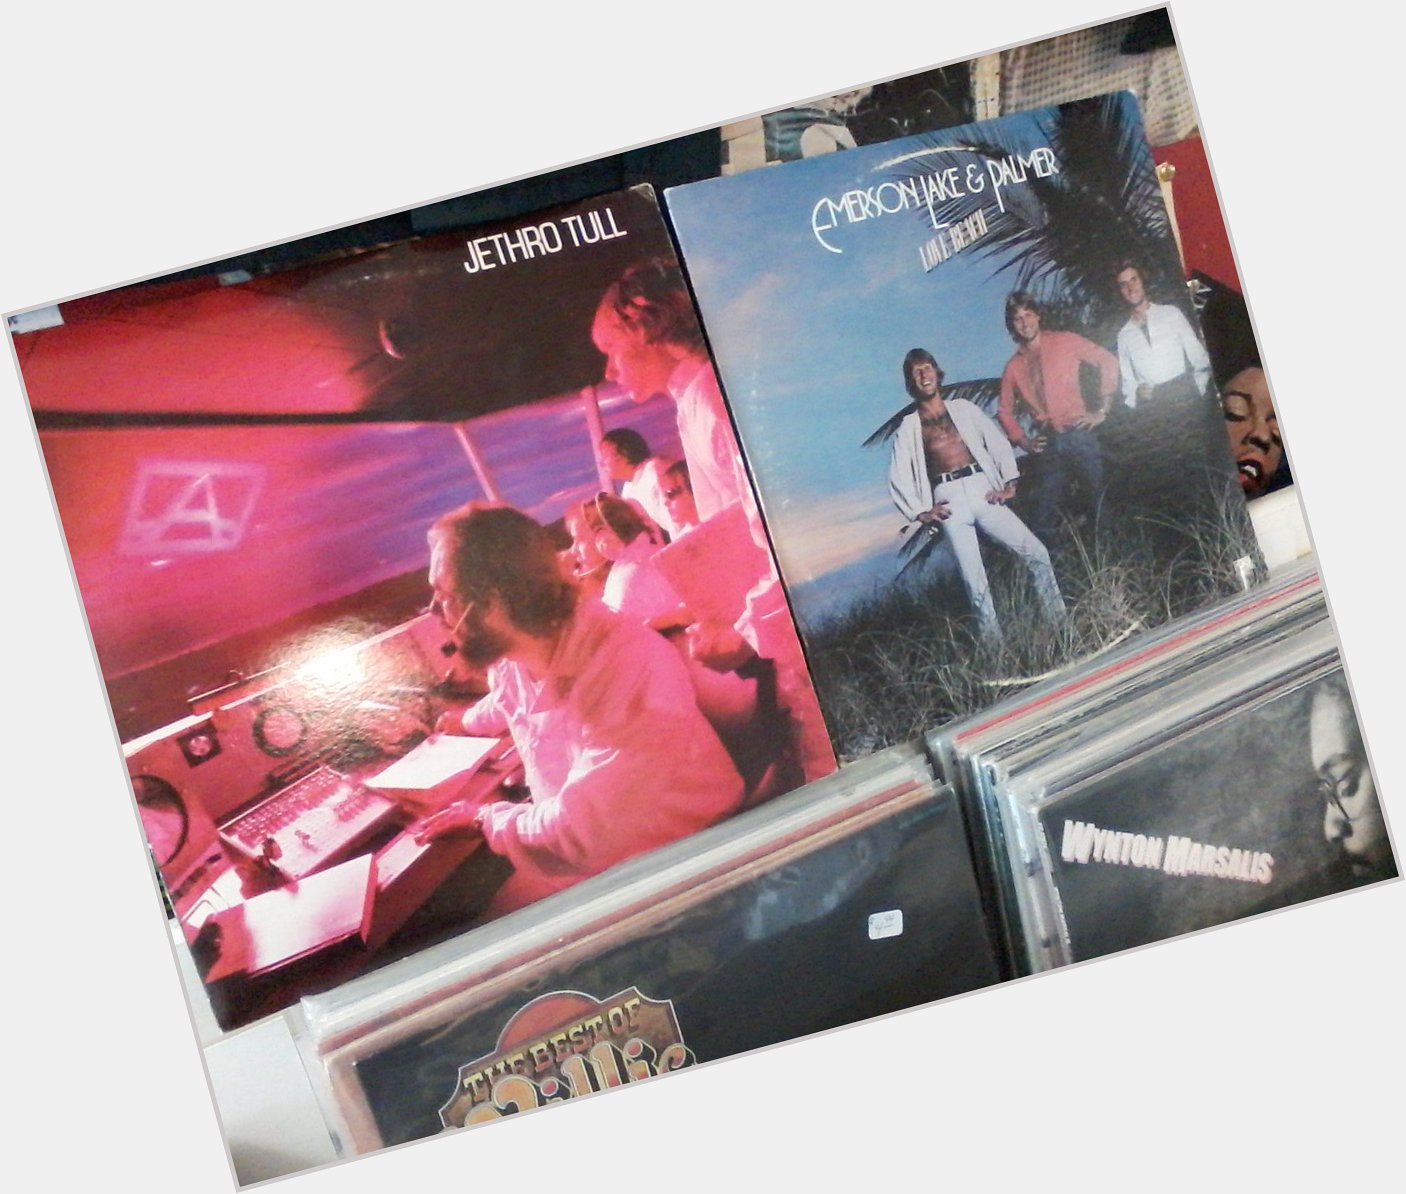 Happy Birthday to Dave Pegg of Jethro Tull & the late Keith Emerson of Emerson, Lake & Palmer 